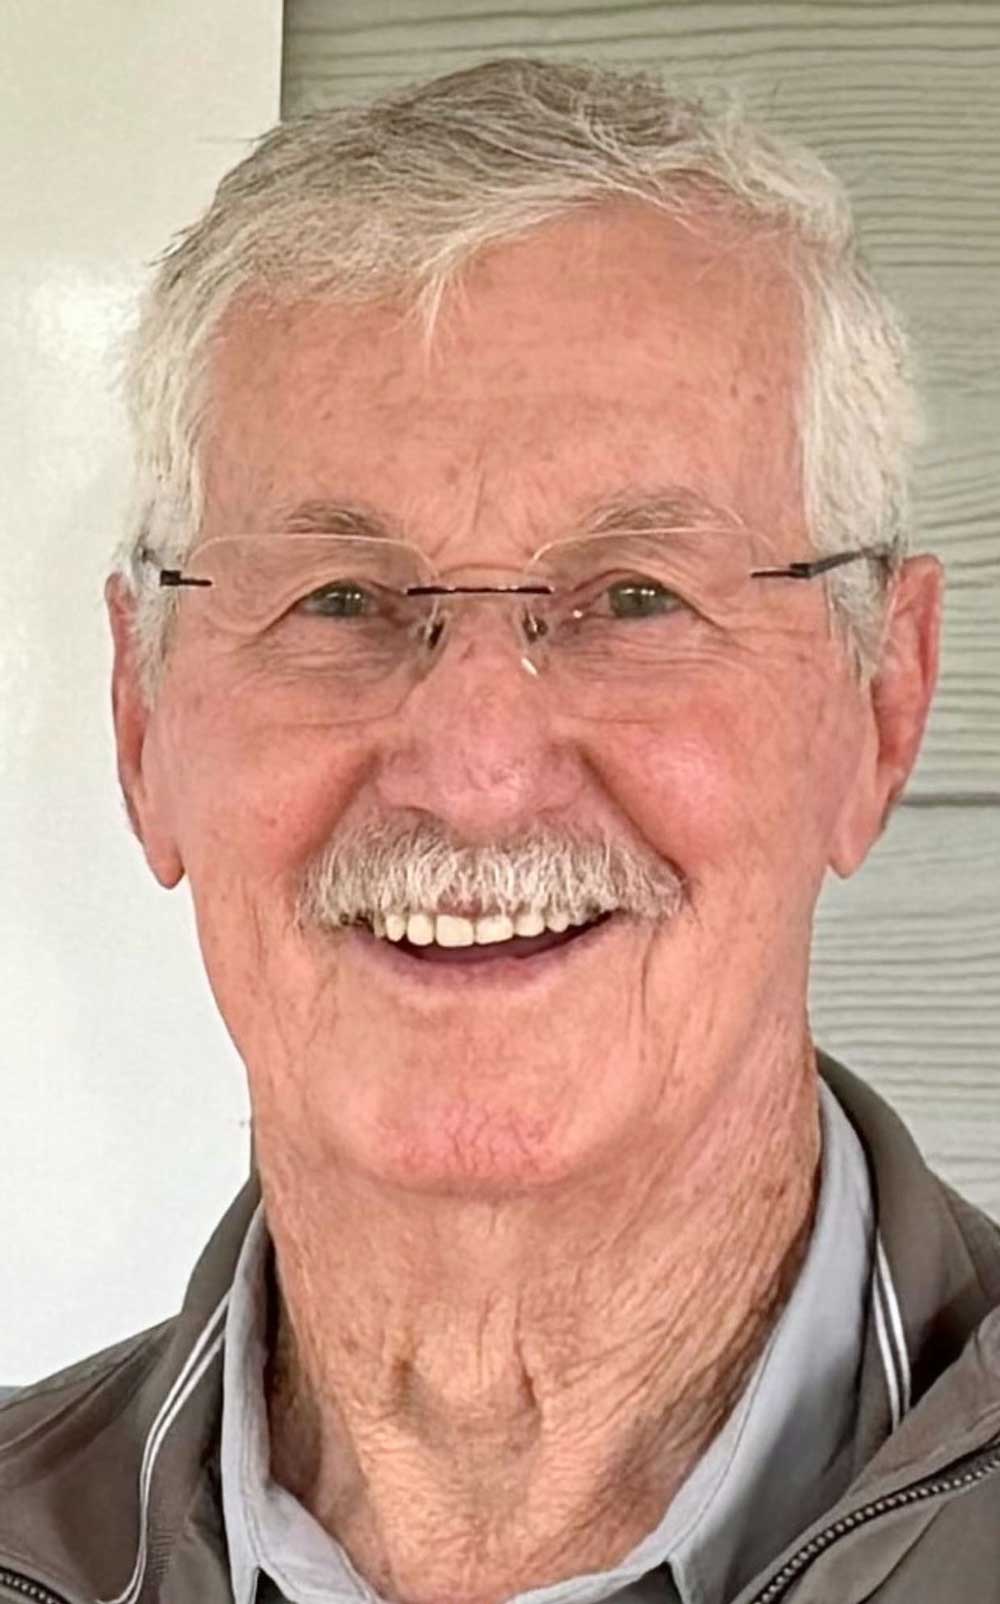 Elderly man with glasses and mustache smiling warmly